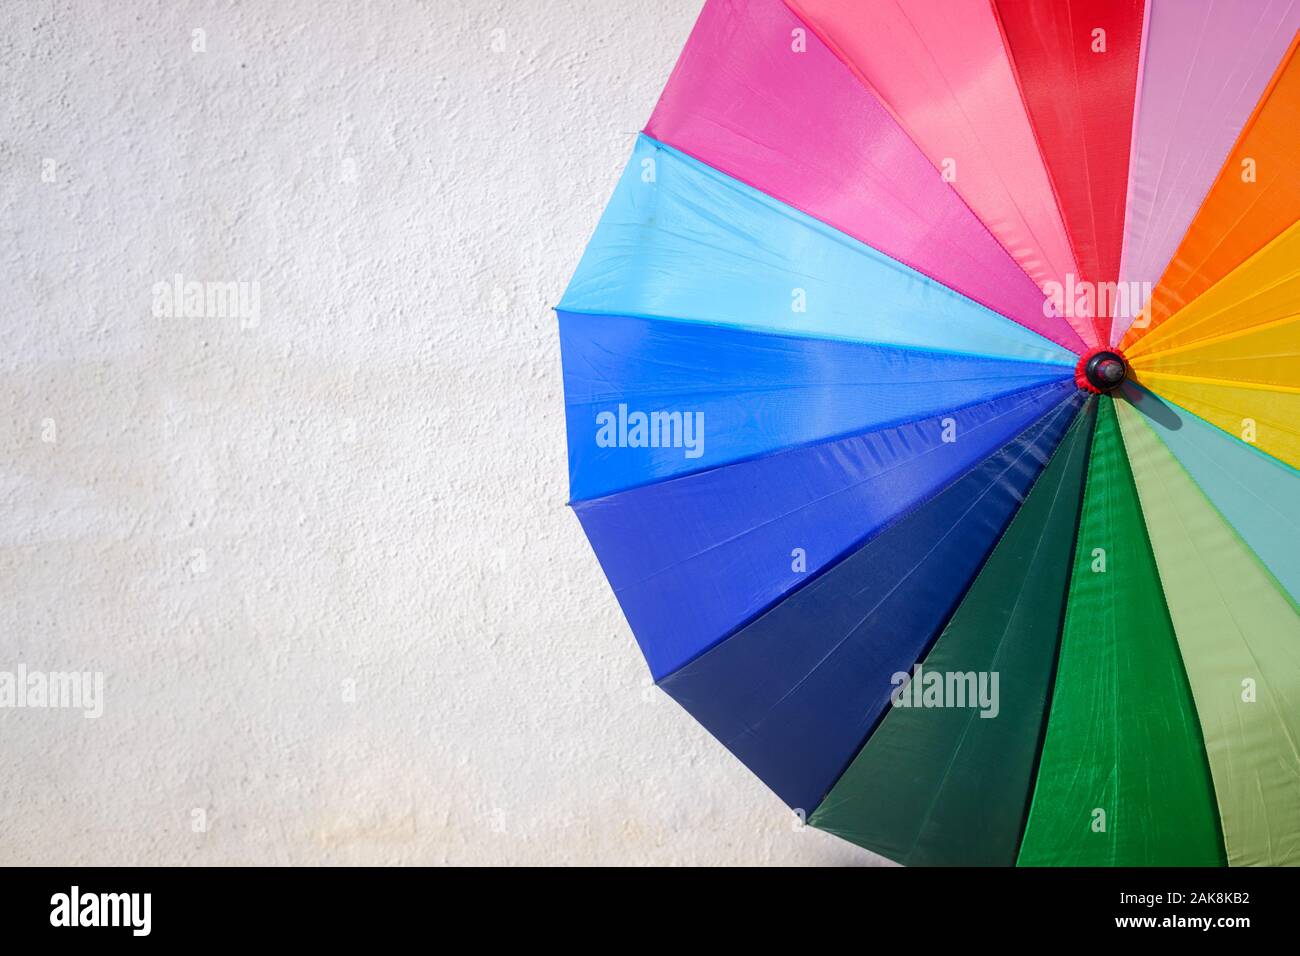 Funny colored umbrella isolated on a white background with negative space, for summer. Stock Photo